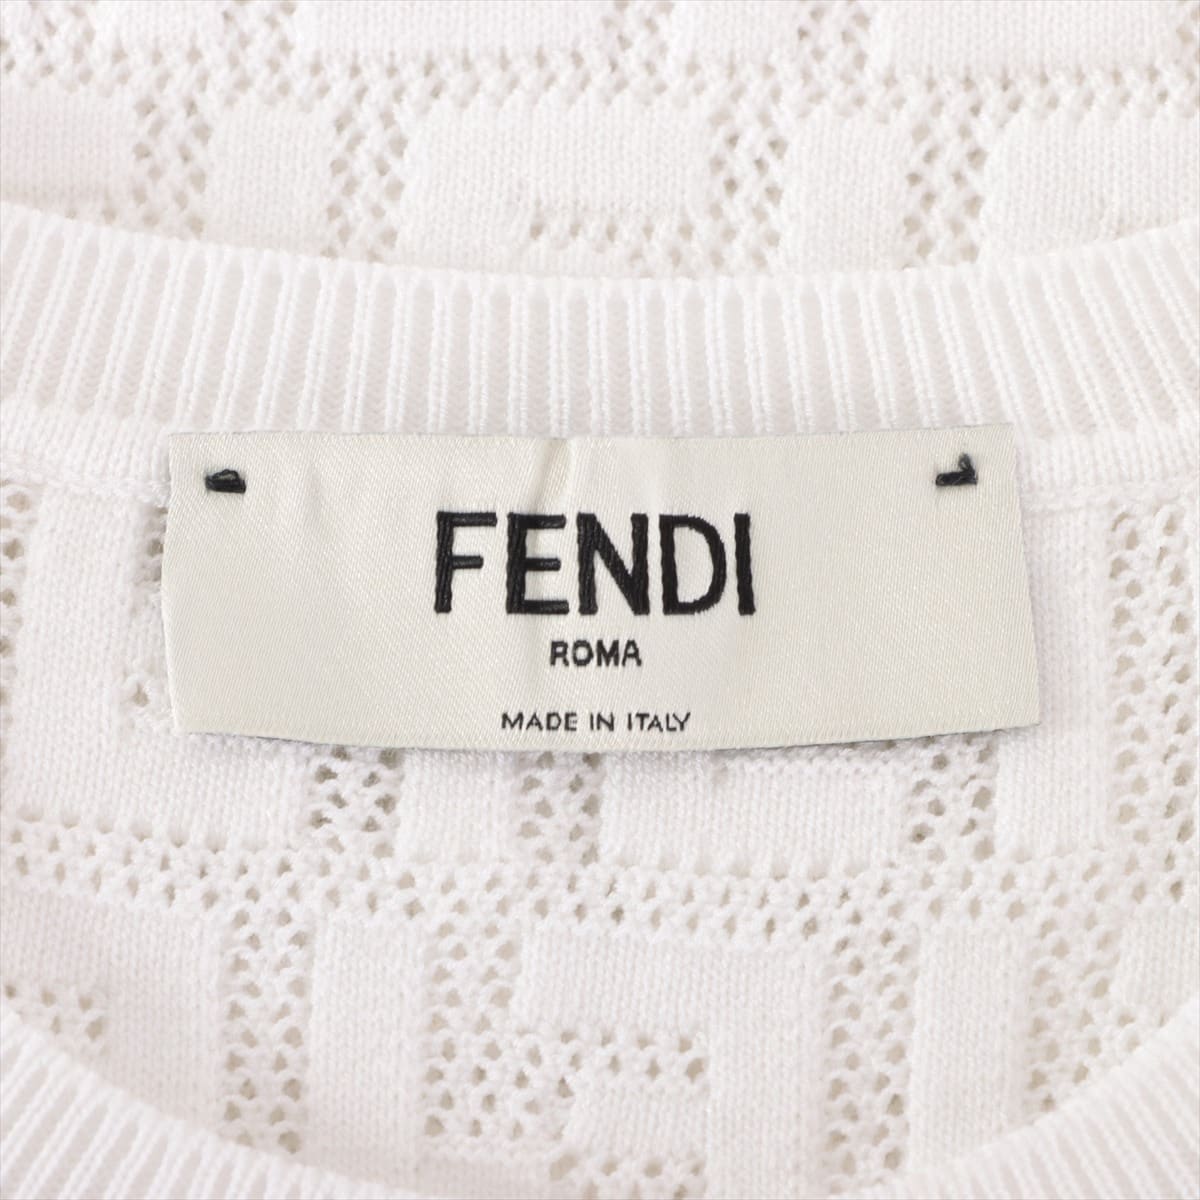 Fendi ZUCCa 22 years Polyester × Rayon Knit dress 36 Ladies' White  Sleeveless With inner